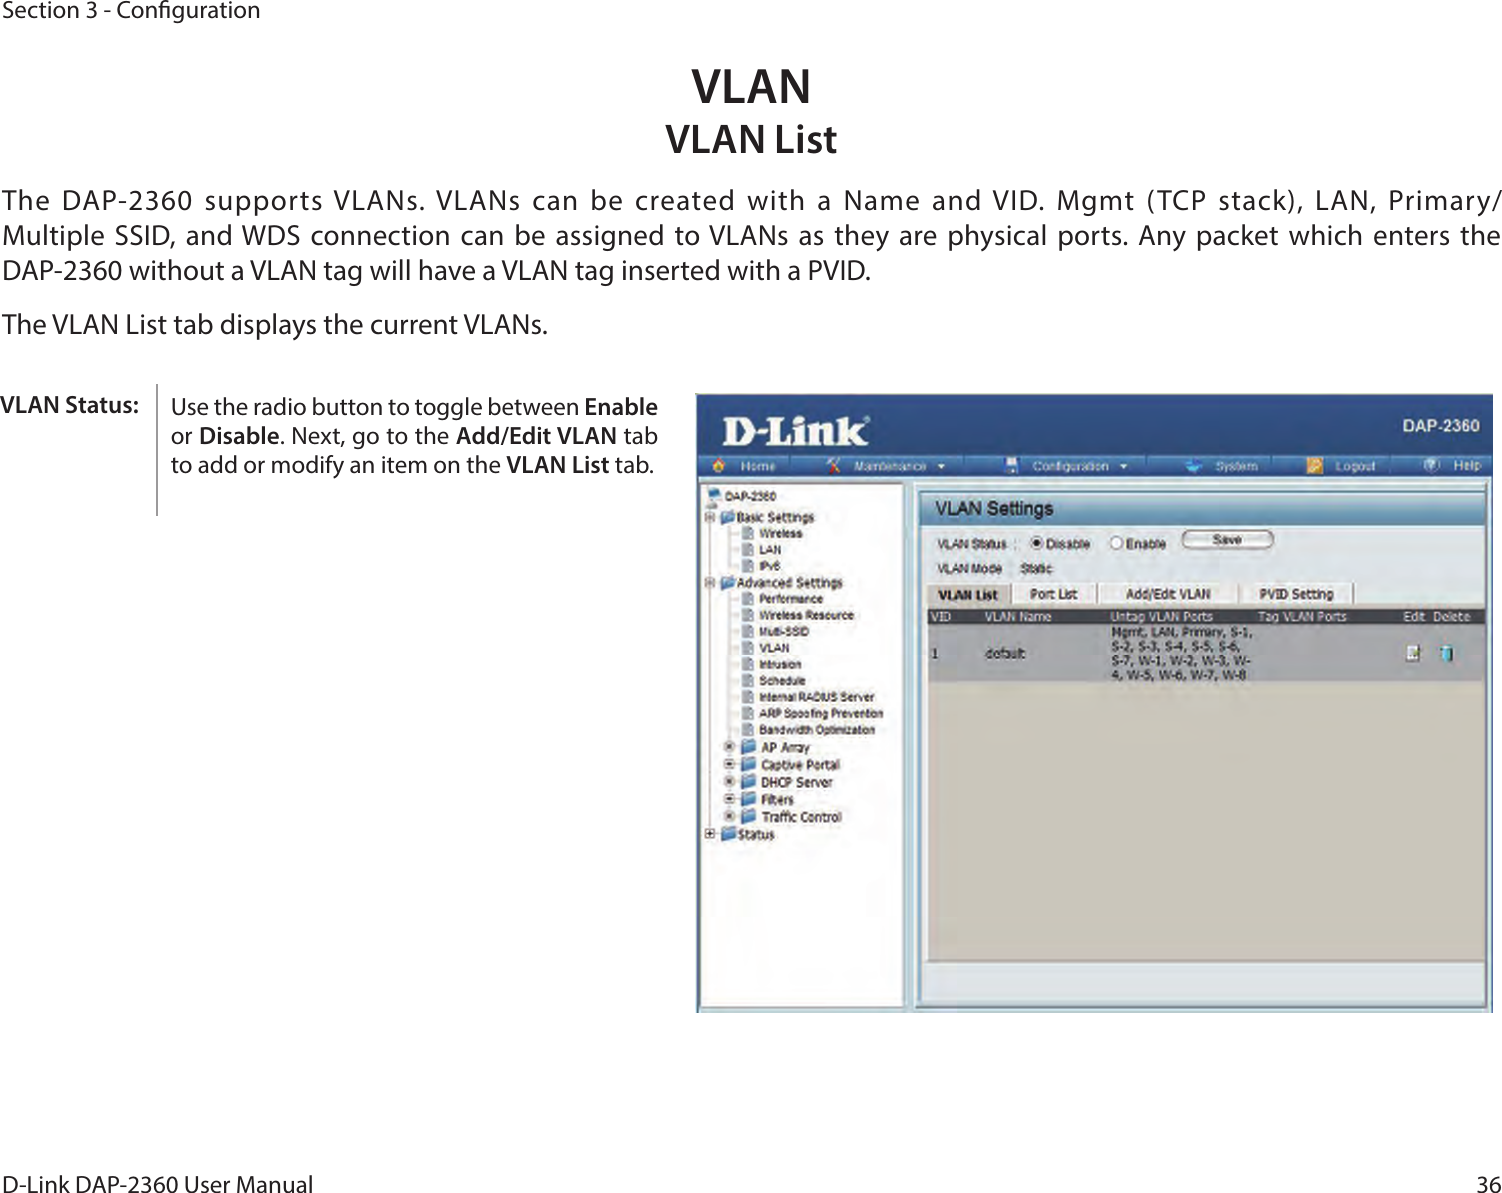 36D-Link DAP-2360 User ManualSection 3 - CongurationVLANVLAN ListThe DAP-2360 supports VLANs. VLANs can be created with a  Name and VID. Mgmt (TCP stack),  LAN, Primary/Multiple SSID,  and WDS connection  can be assigned to VLANs  as they are physical ports. Any packet which enters the DAP-2360 without a VLAN tag will have a VLAN tag inserted with a PVID.The VLAN List tab displays the current VLANs.Use the radio button to toggle between Enable or Disable. Next, go to the Add/Edit VLAN tab to add or modify an item on the VLAN List tab. VLAN Status: